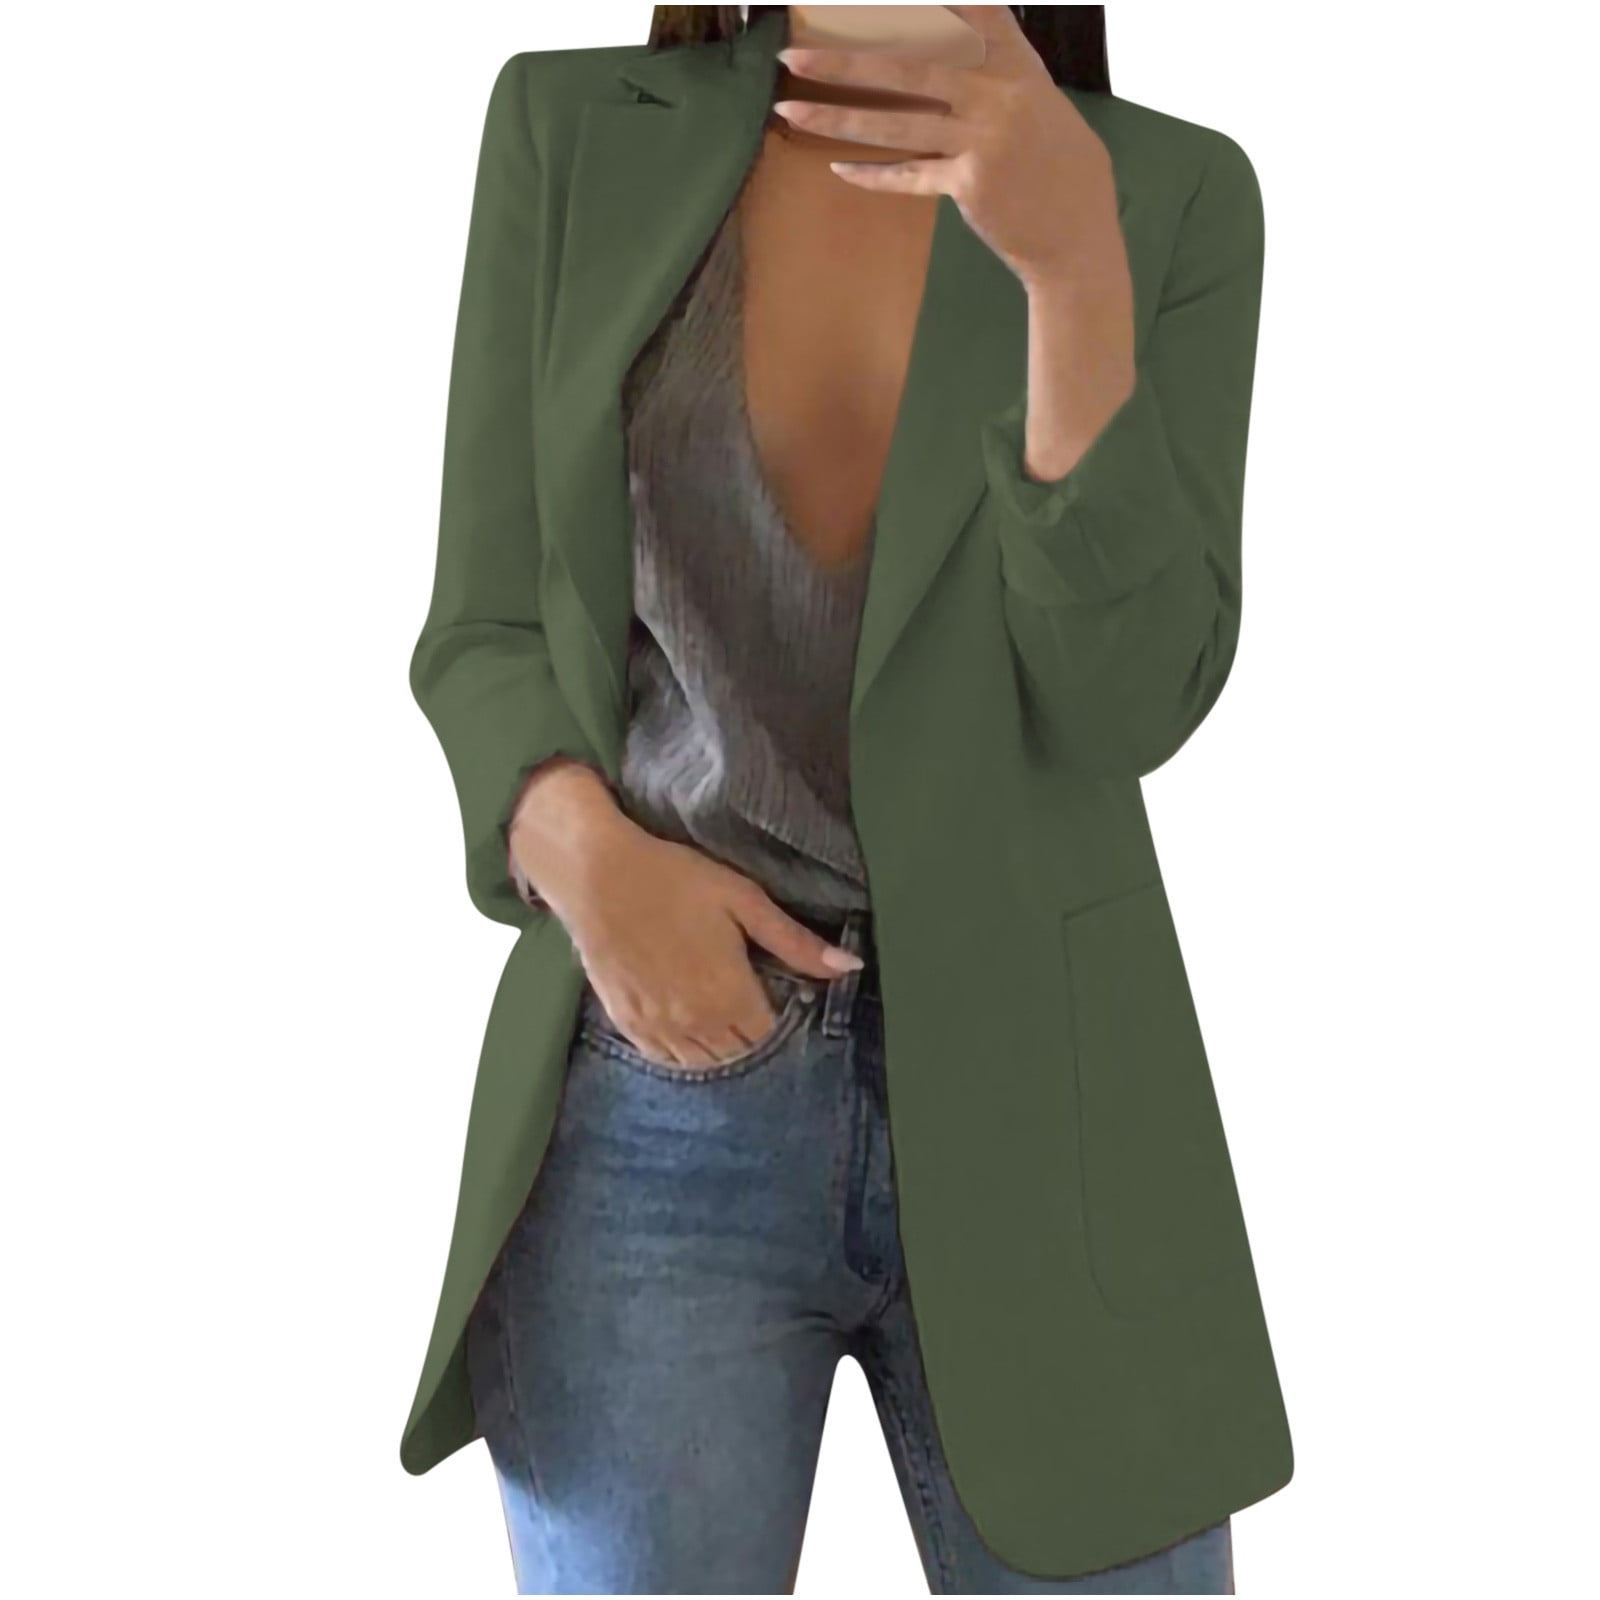 Lapel Blazer for Women Office Casual Long Sleeve Tunic Coat Solid Color Elegant Simple Cardigan Tops 